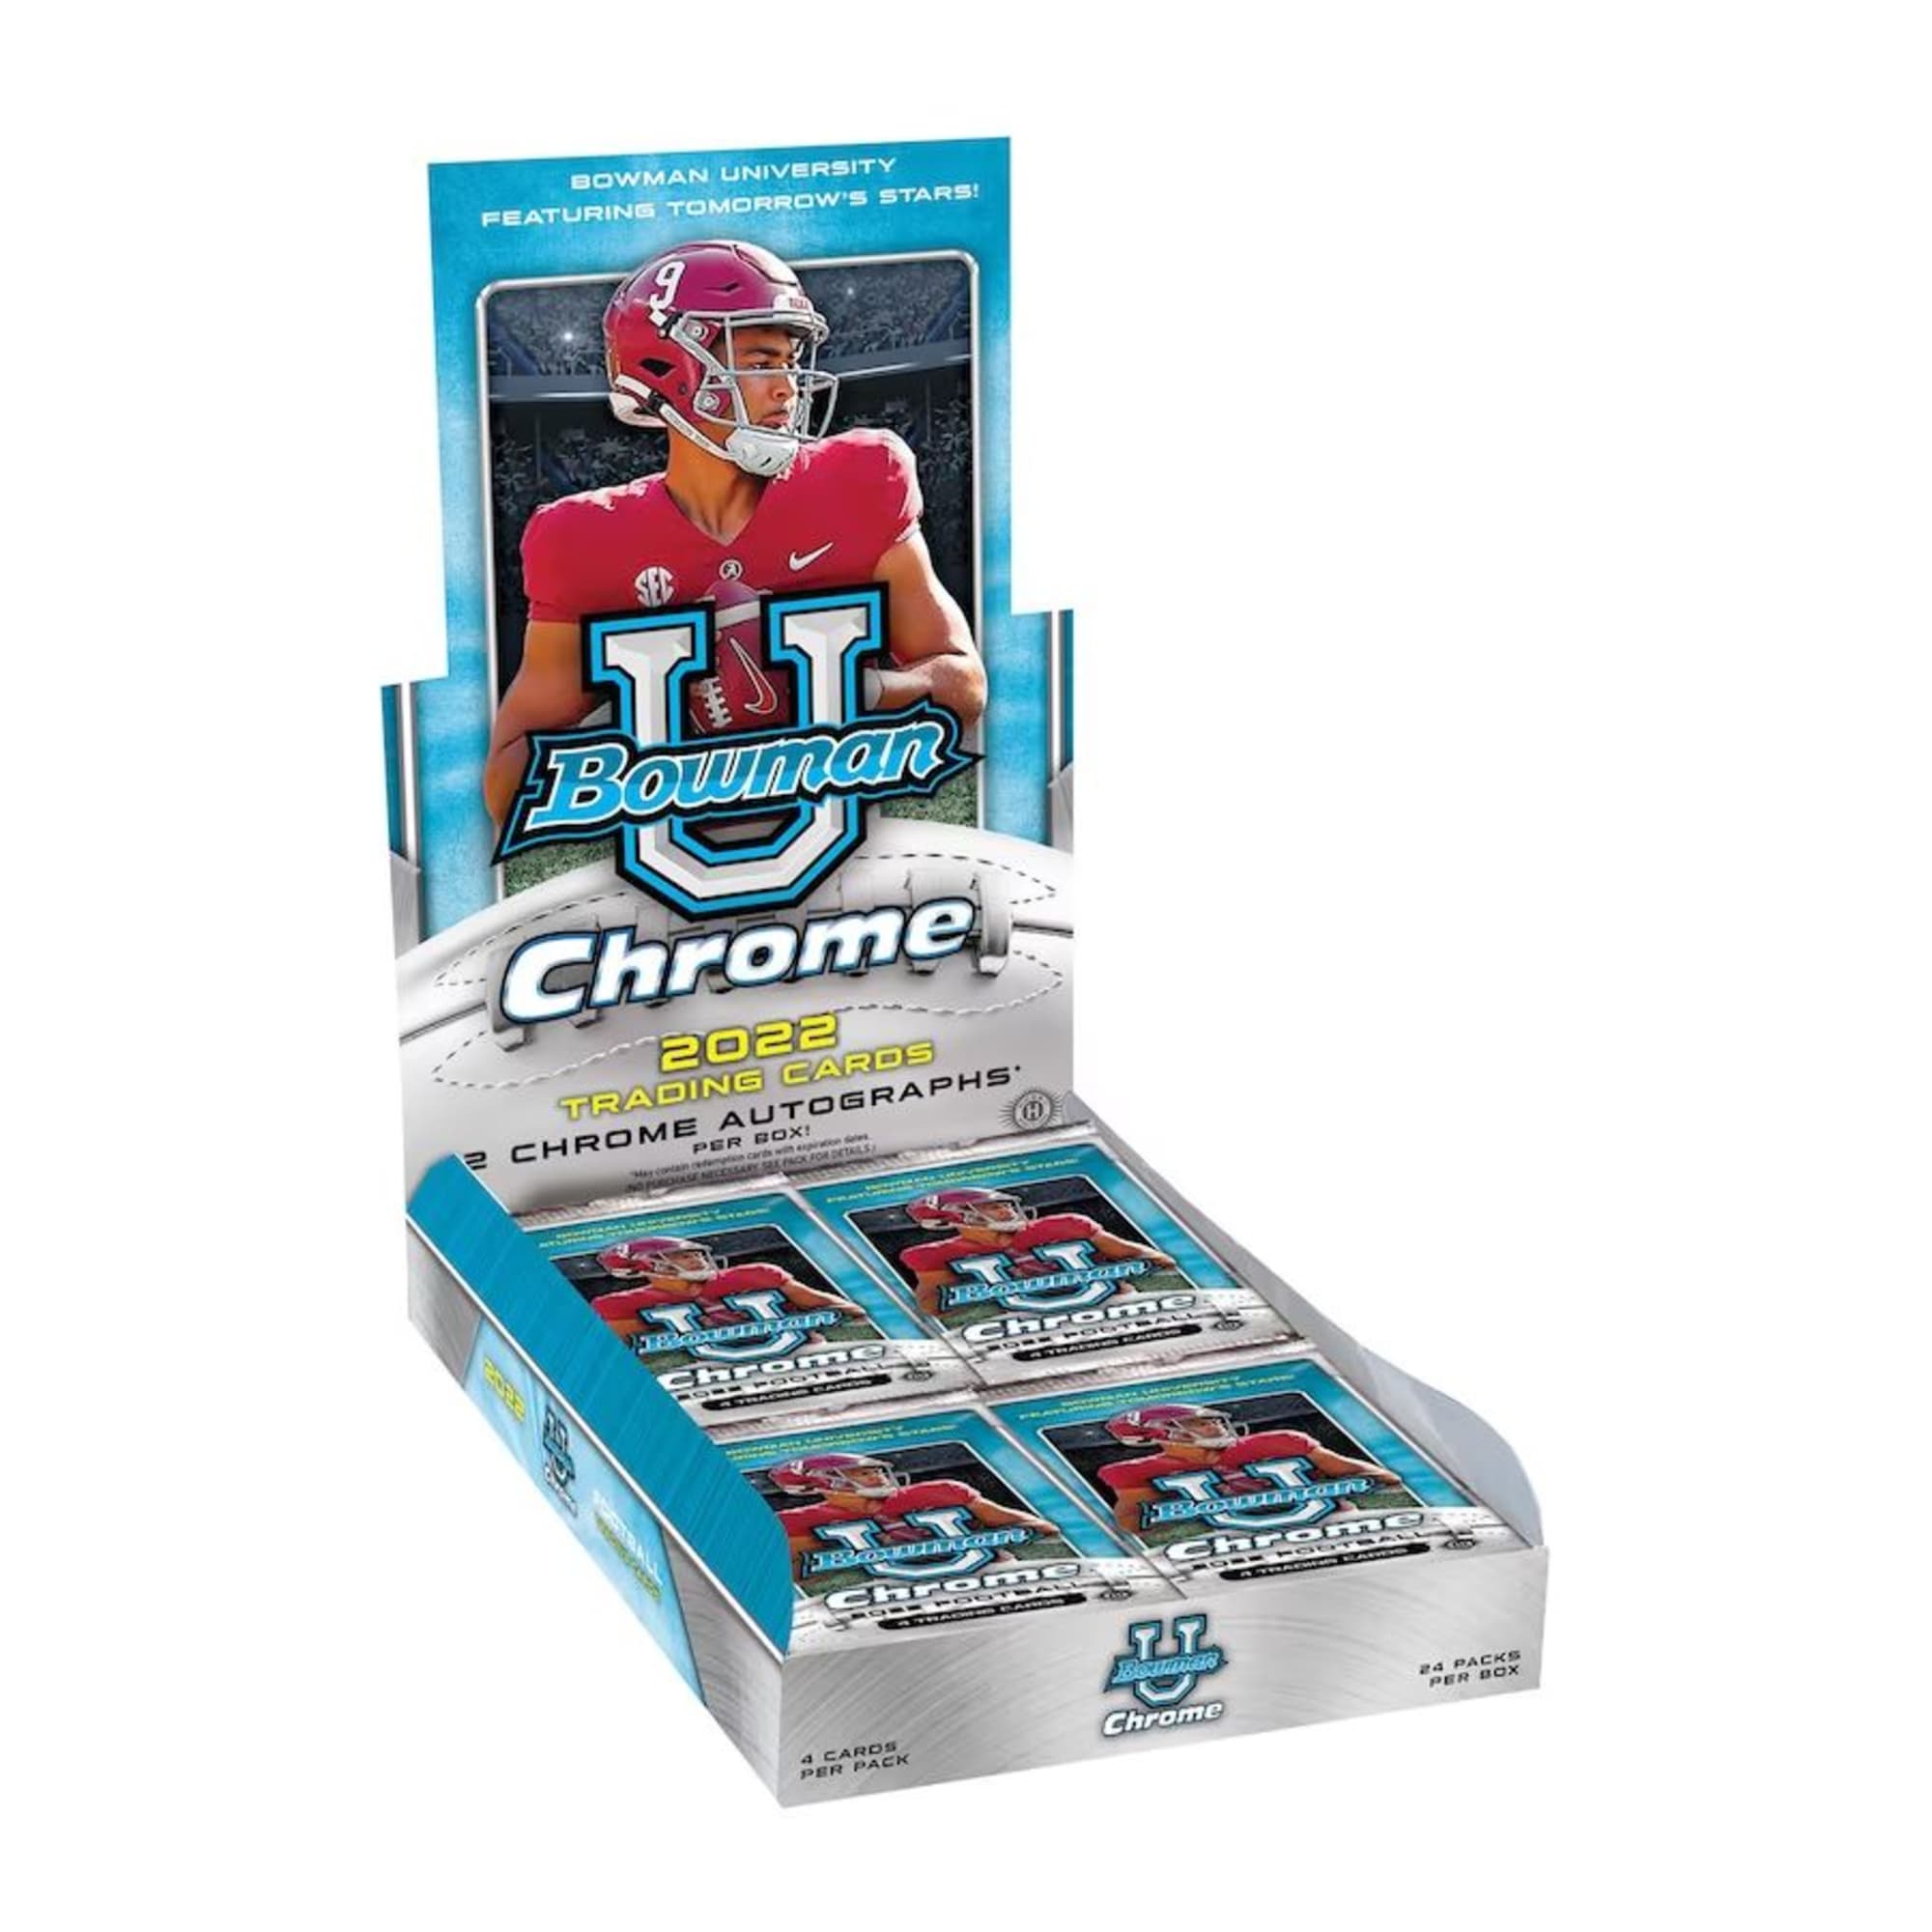 Clemson football fans need to check out Bowman Chrome U cards